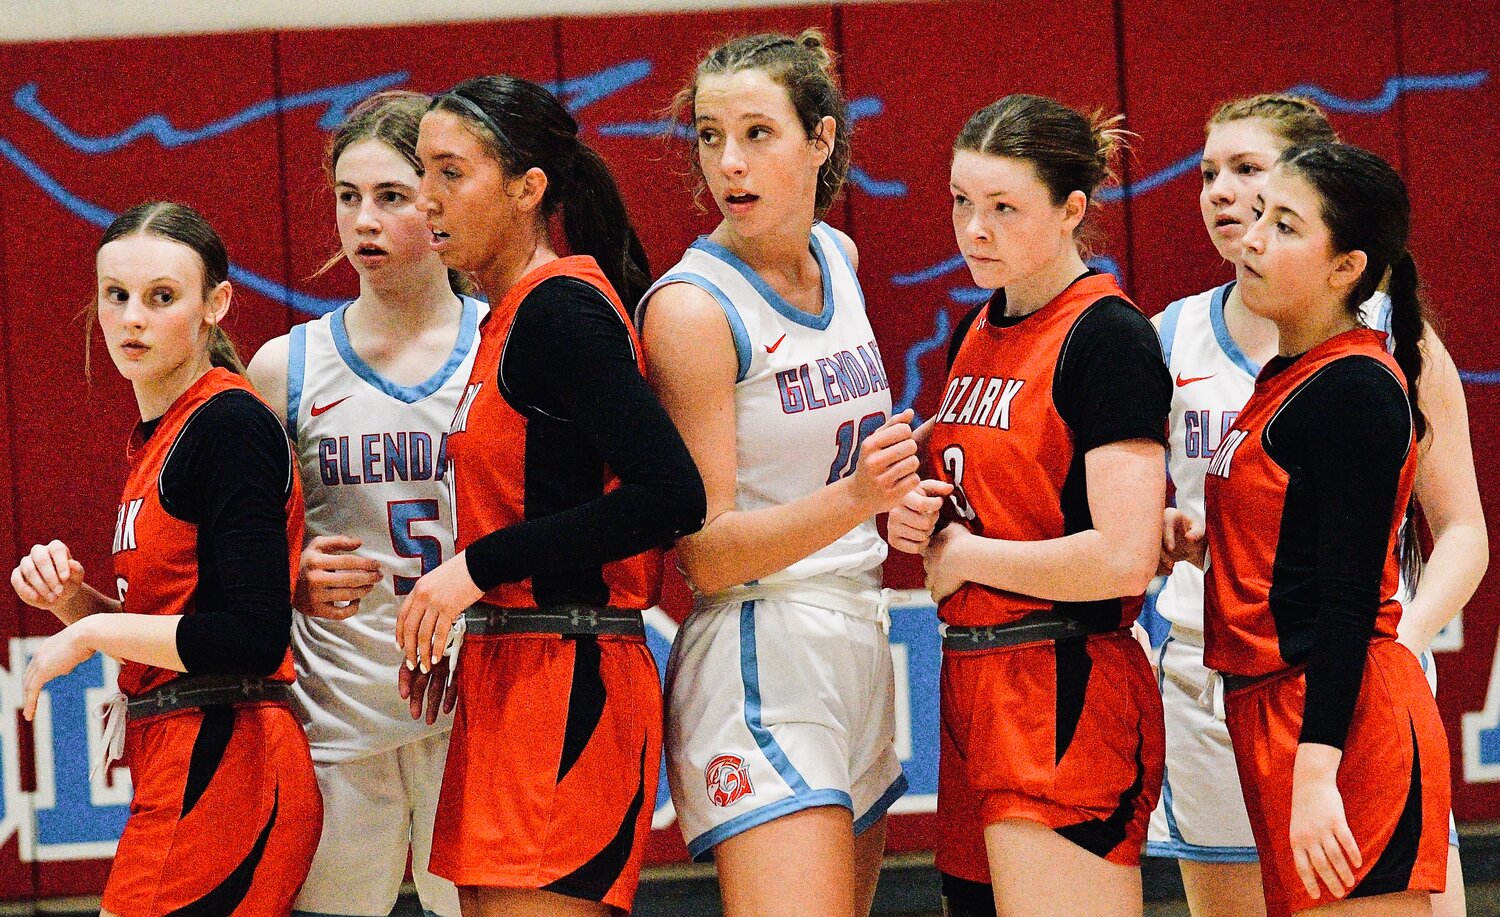 OZARK AND GLENDALE PLAYERS line up while preparing for an in-bounds pass.